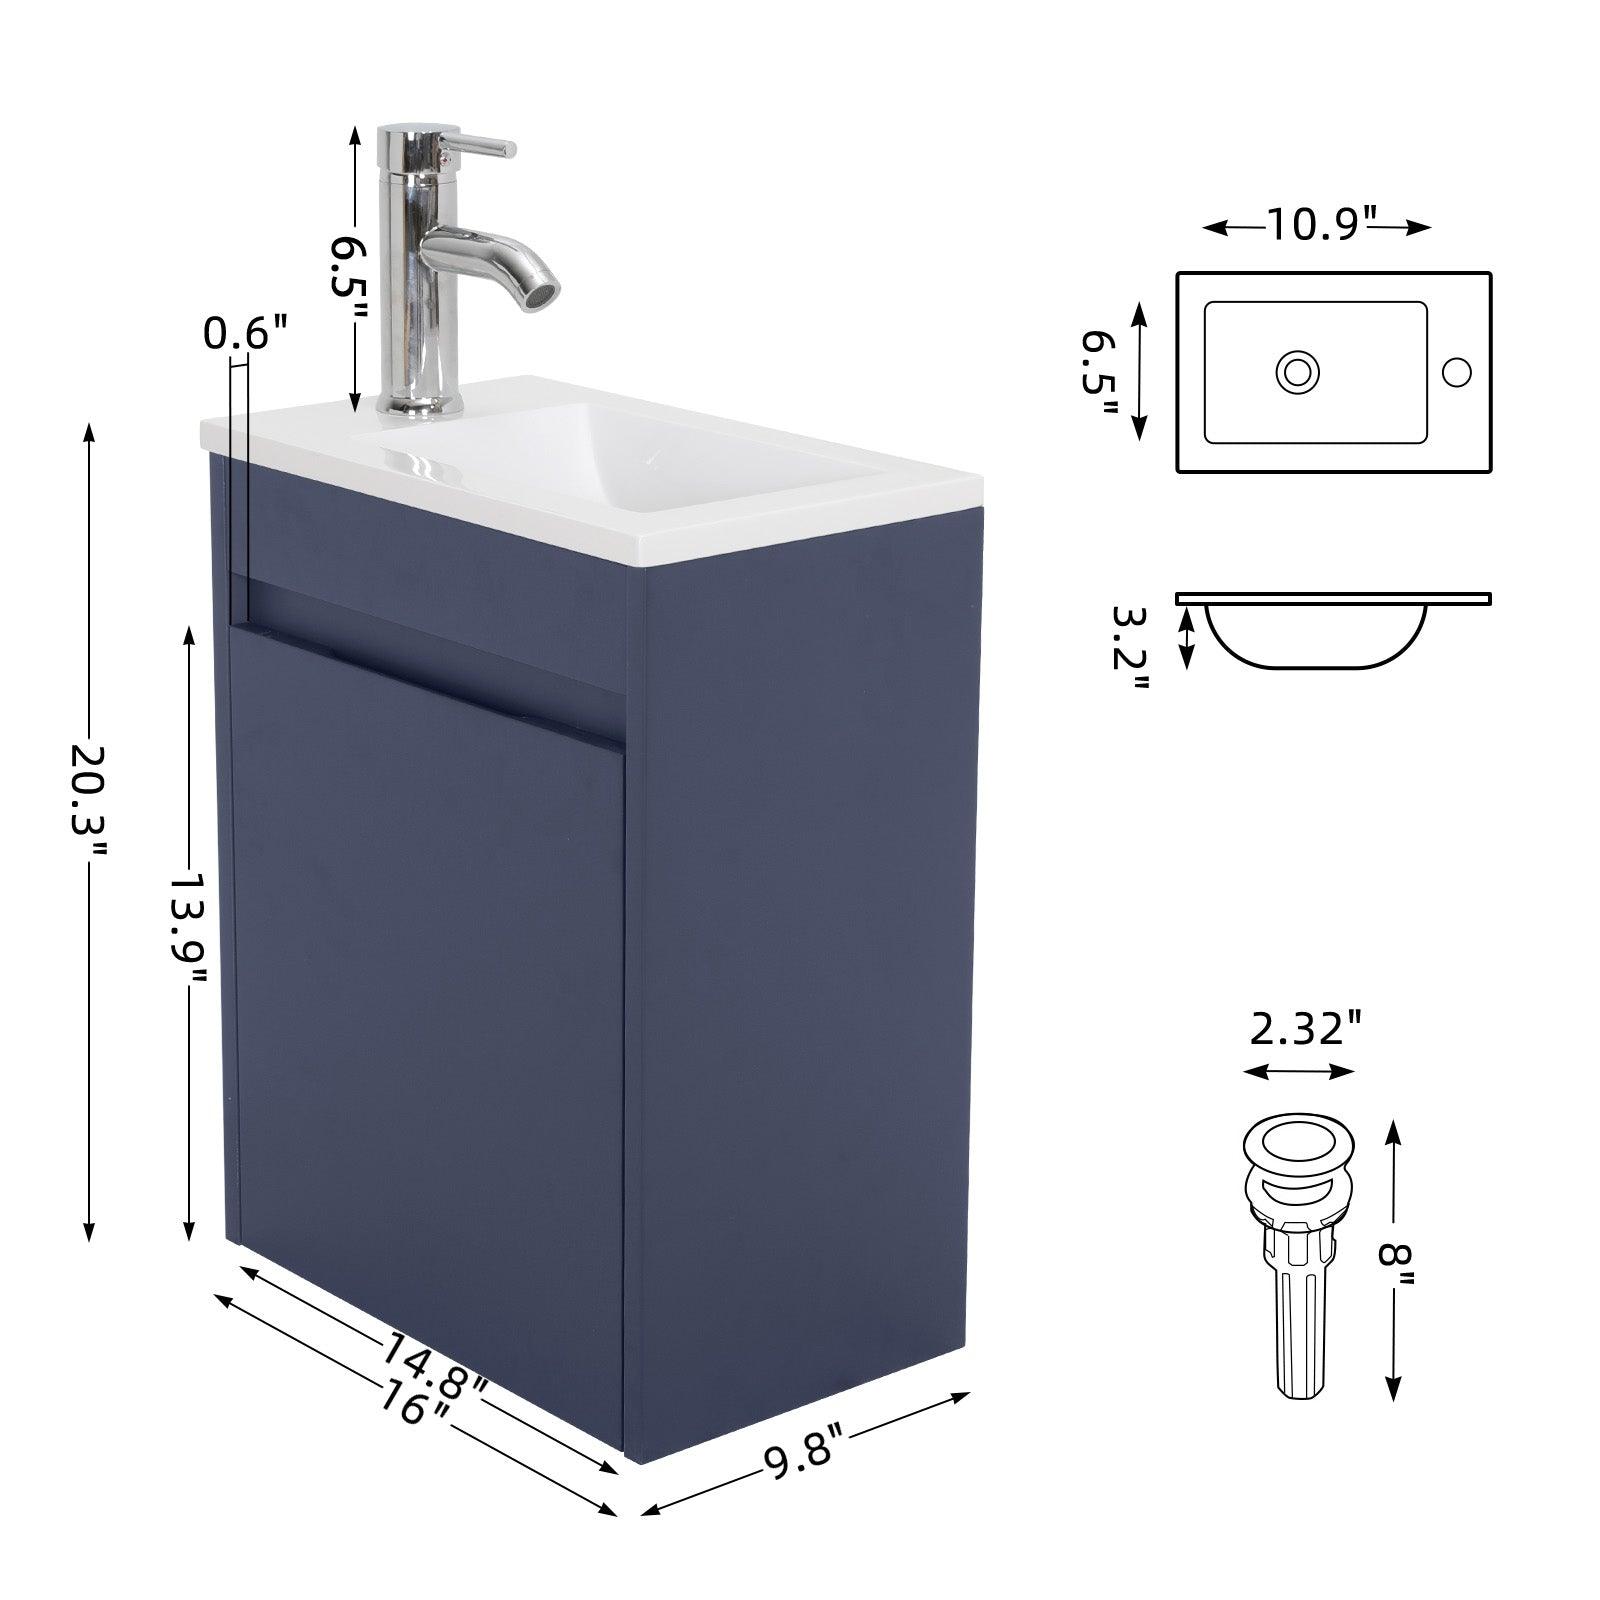 Eclife 16" Bathroom Floating Vanity Sink Combo for Small Space, Modern vanity with vessel sink, white